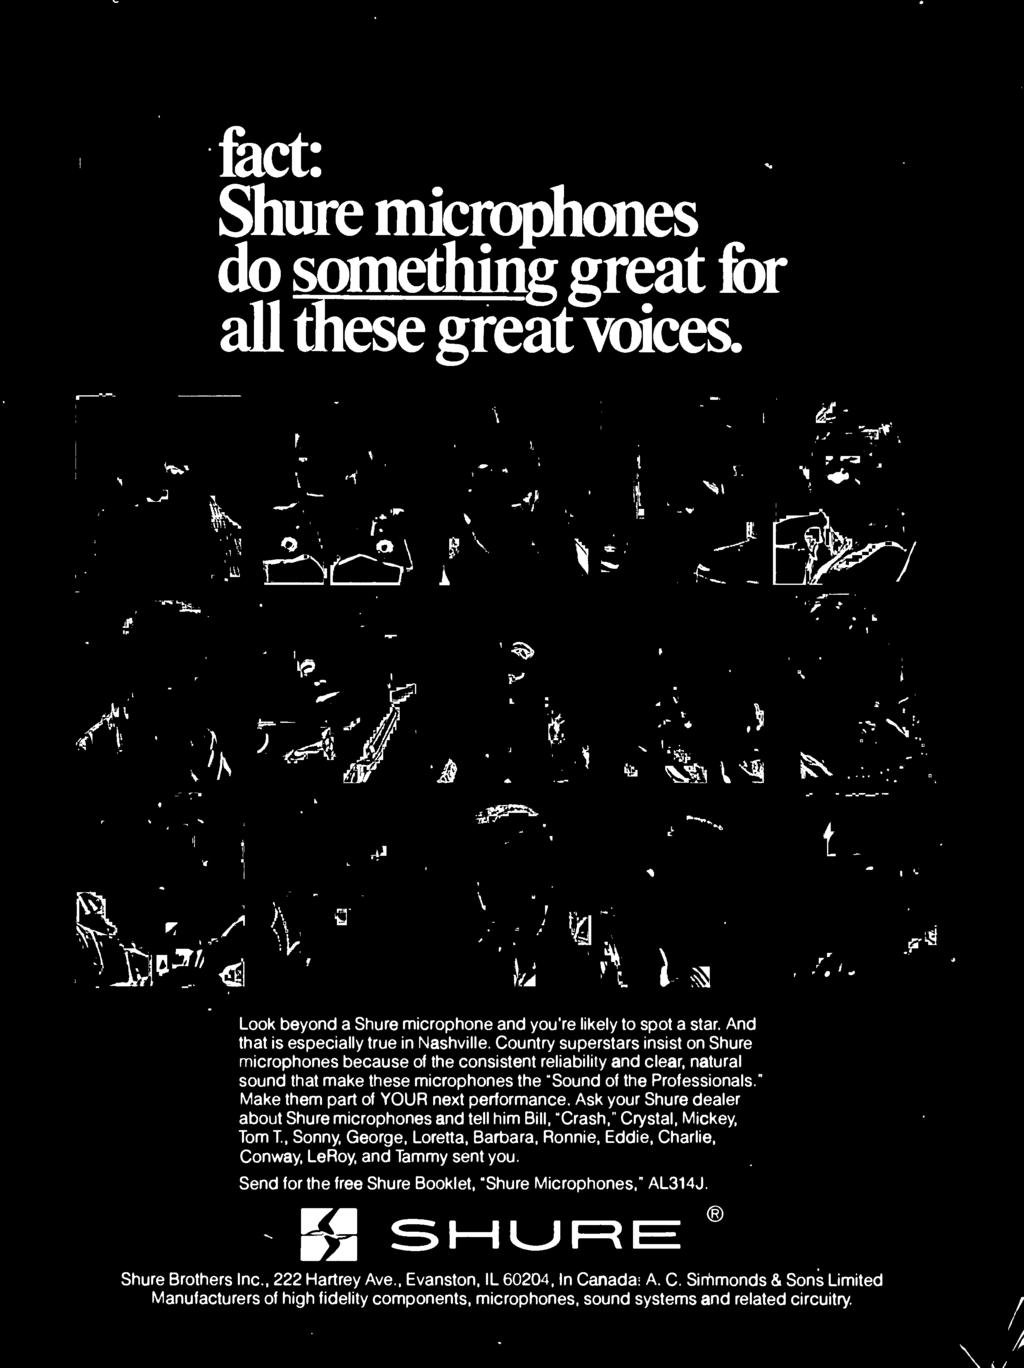 Conway, LeRoy, and Tammy sent you Send for the free Shure Booklet, "Shure Microphones," AL314J S -URE Shure Brothers nc, 222 Hartrey Ave,